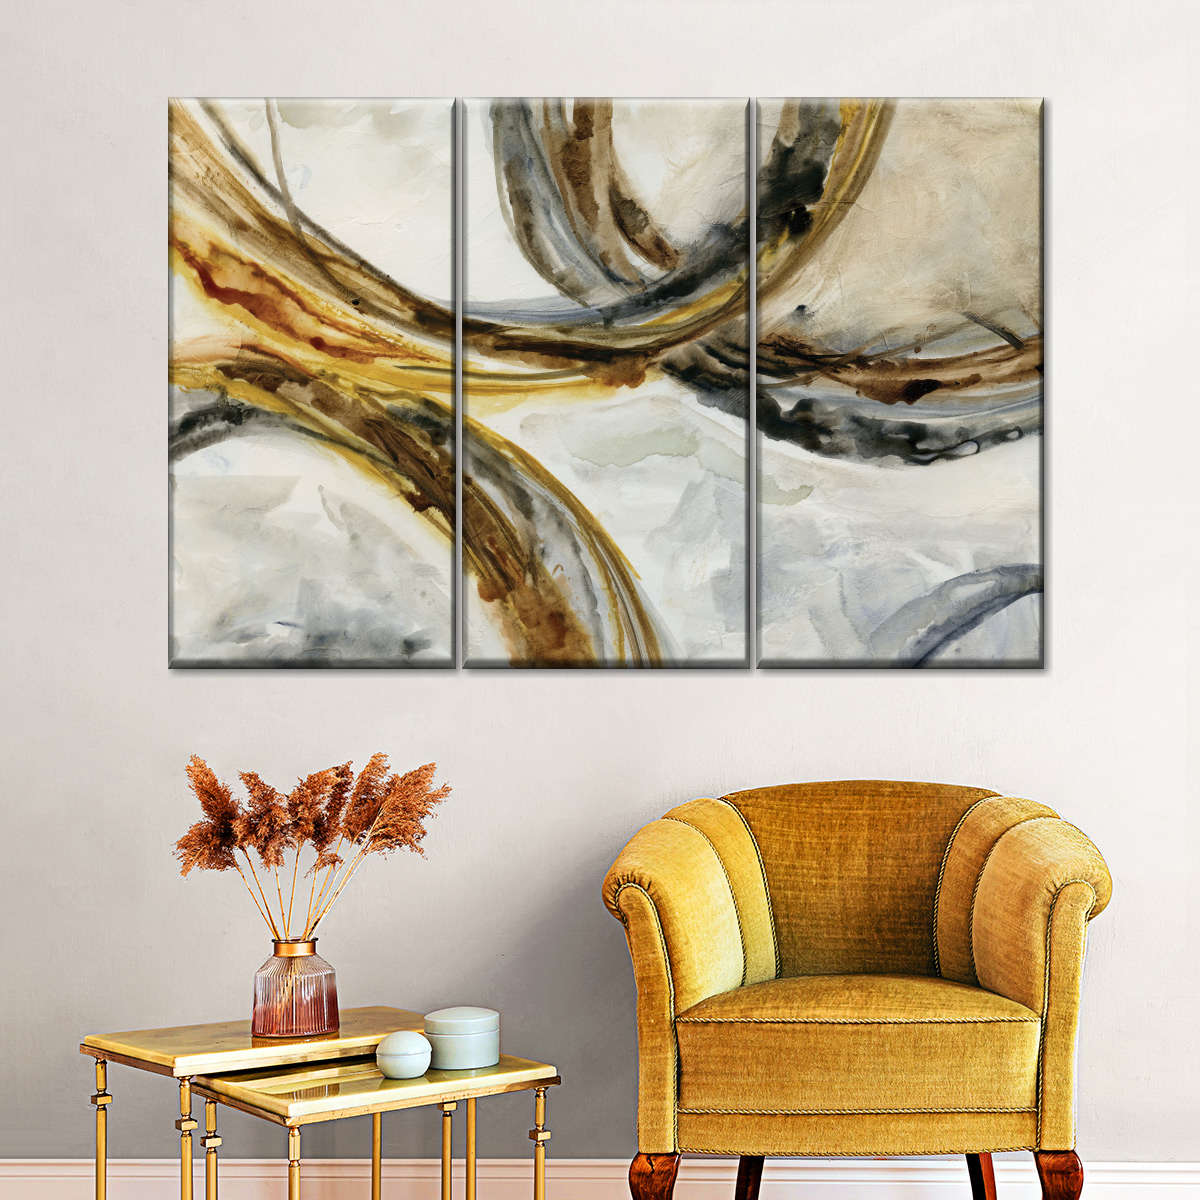 Emboldened Abstract Wall Art: Canvas Prints, Art Prints & Framed Canvas